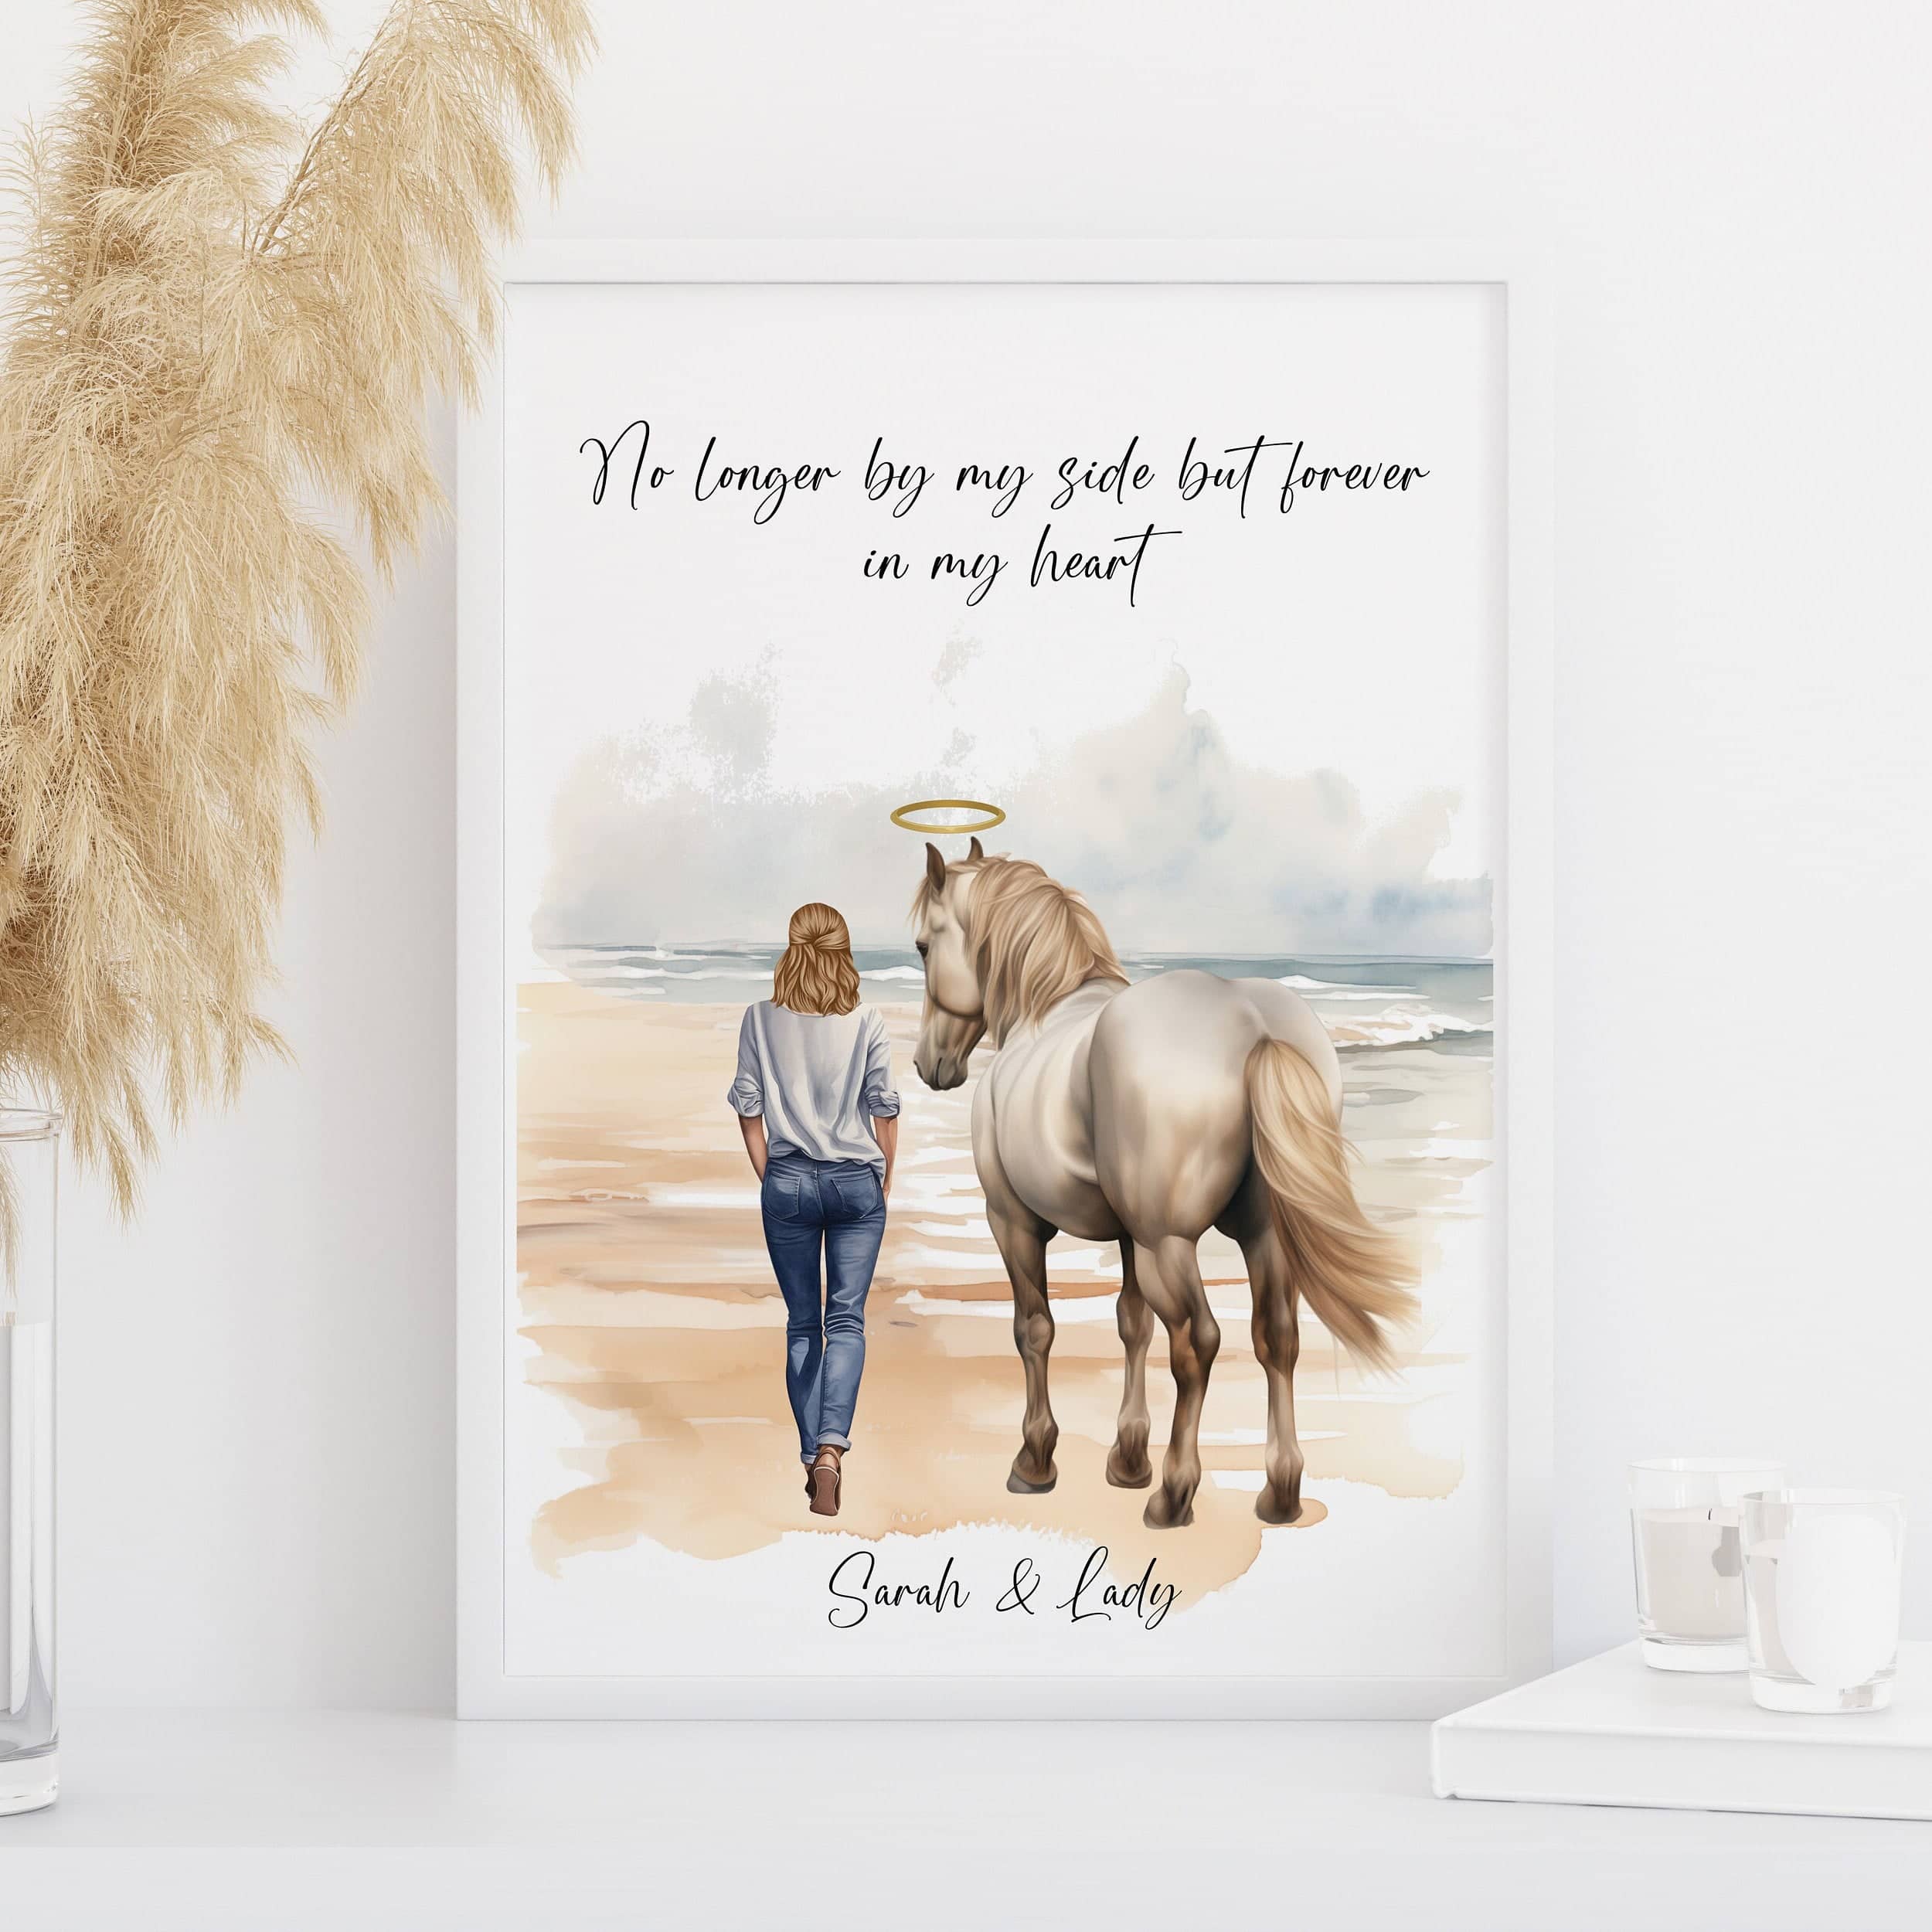 Custom Horse Print, Horses and Ponies, Gifts for horse rider, Horse loss,Horses memorial gifts, Horse bereavement, Horse remembrance Keepsake, In sympathy,Equestrian, horses are family